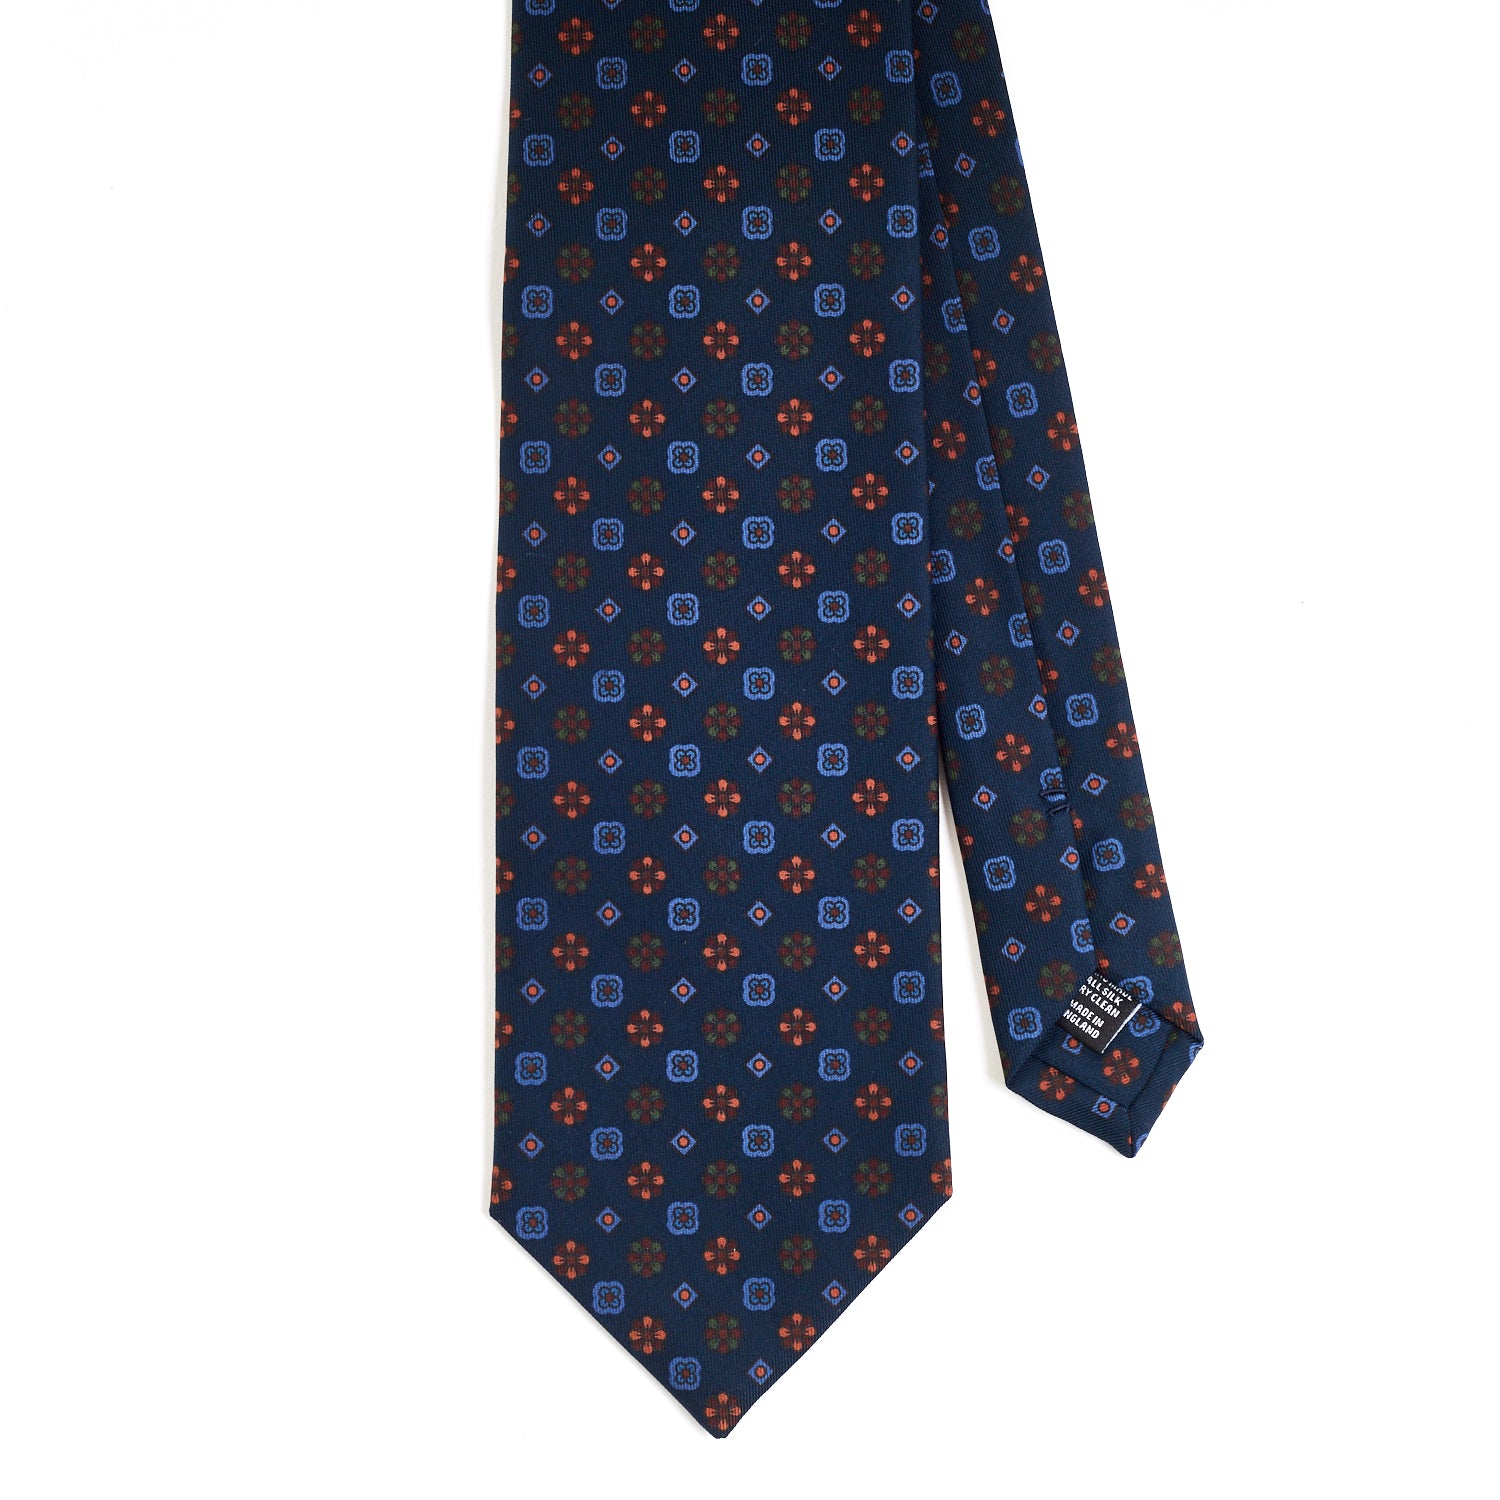 A KirbyAllison.com Sovereign Grade Dark Navy Mixed Floret Ancient Madder Tie with a blue and orange pattern of the highest quality.